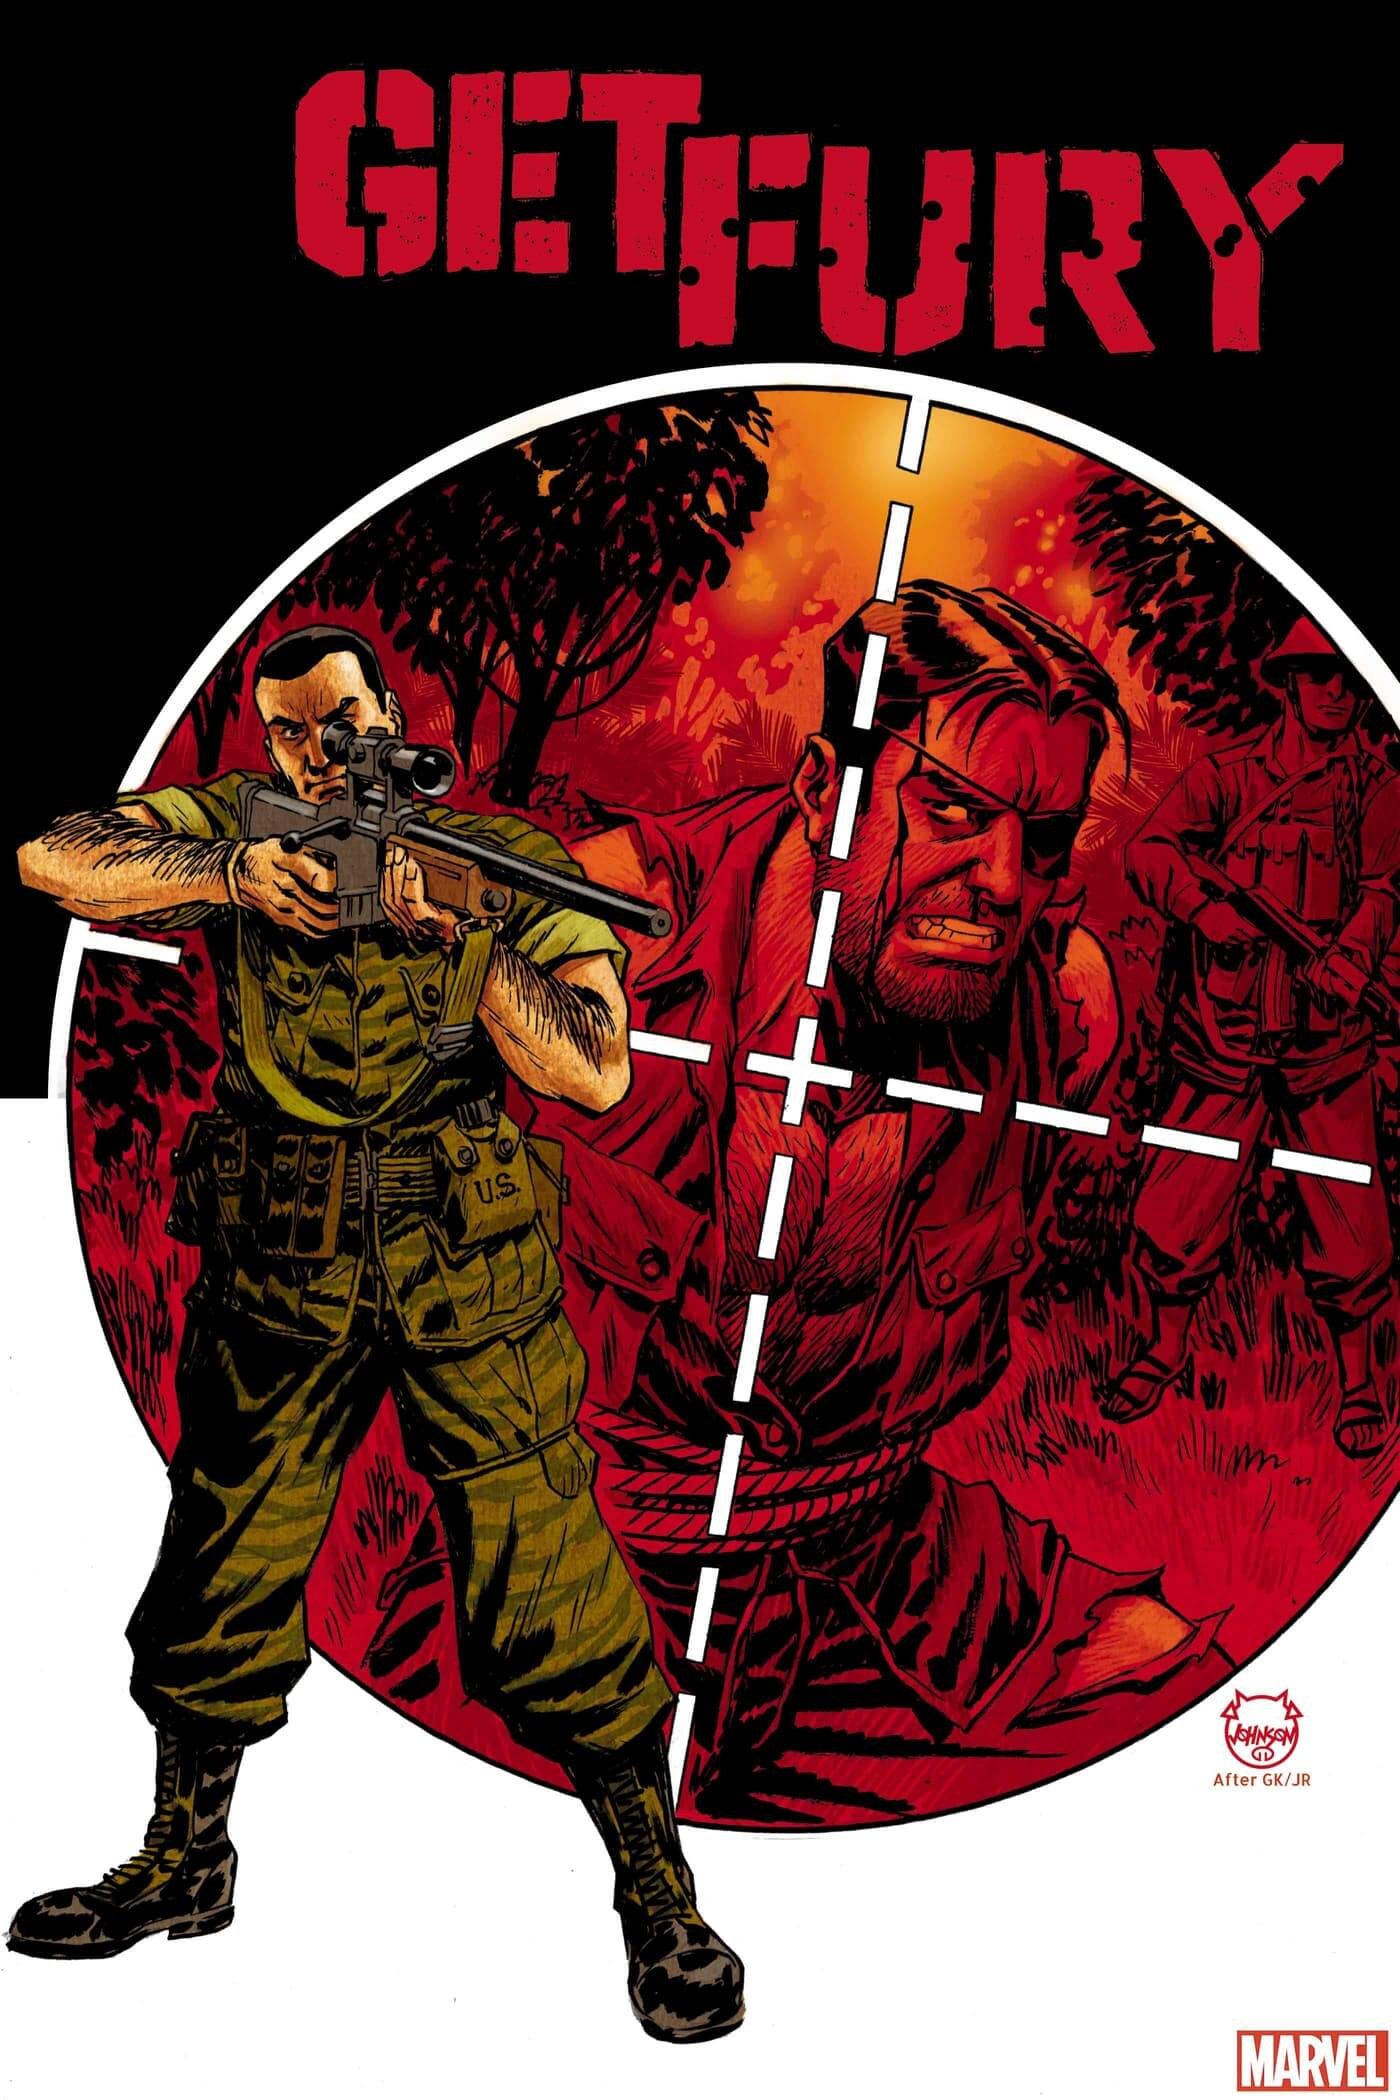 Cover di Punisher: Get Fury 1 di Dave Johnson